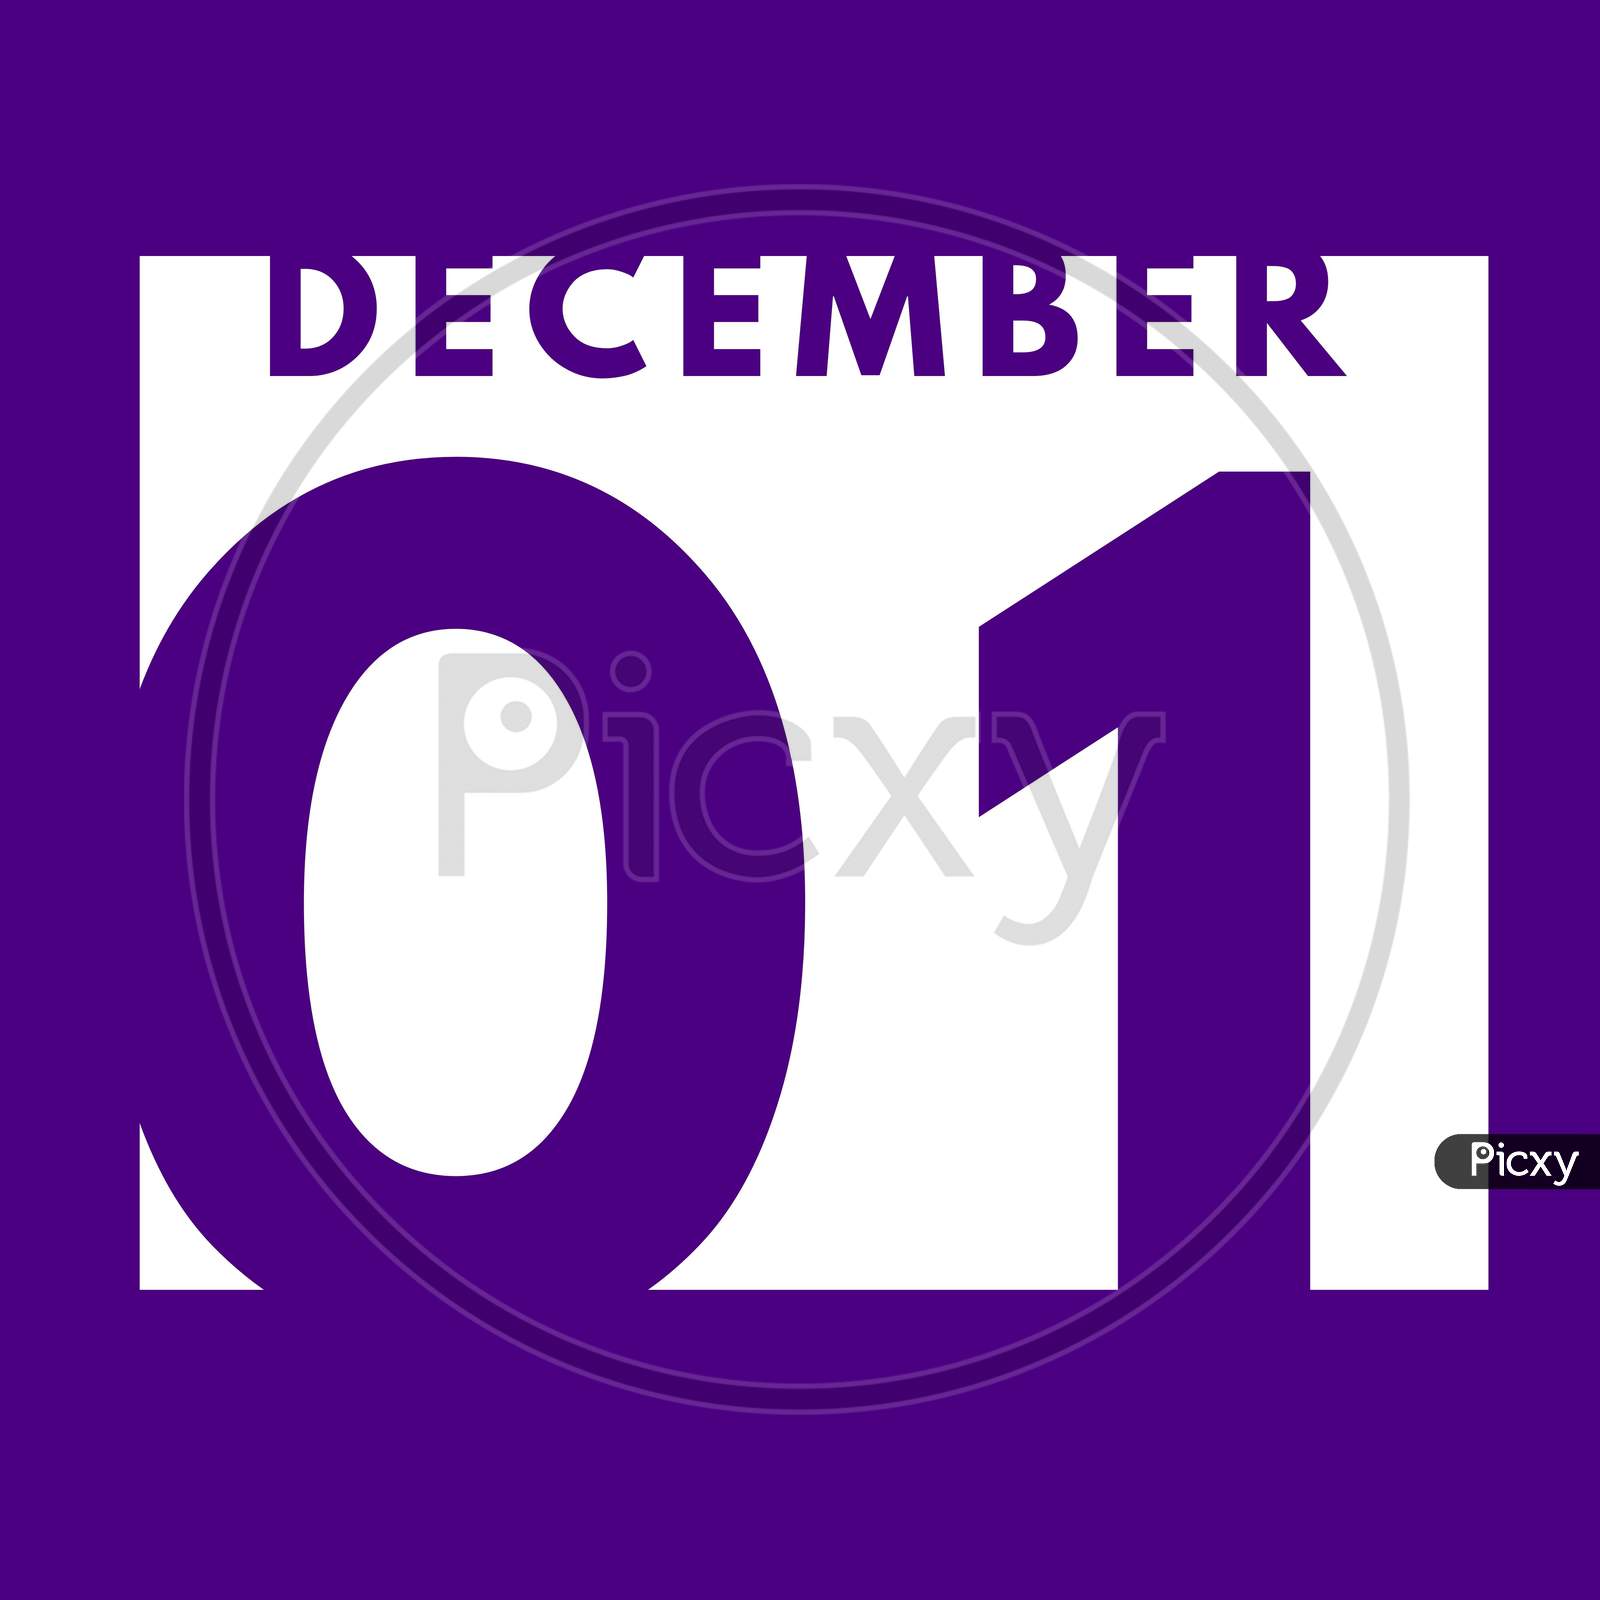 December 1 . Flat Modern Daily Calendar Icon .Date ,Day, Month .Calendar For The Month Of December